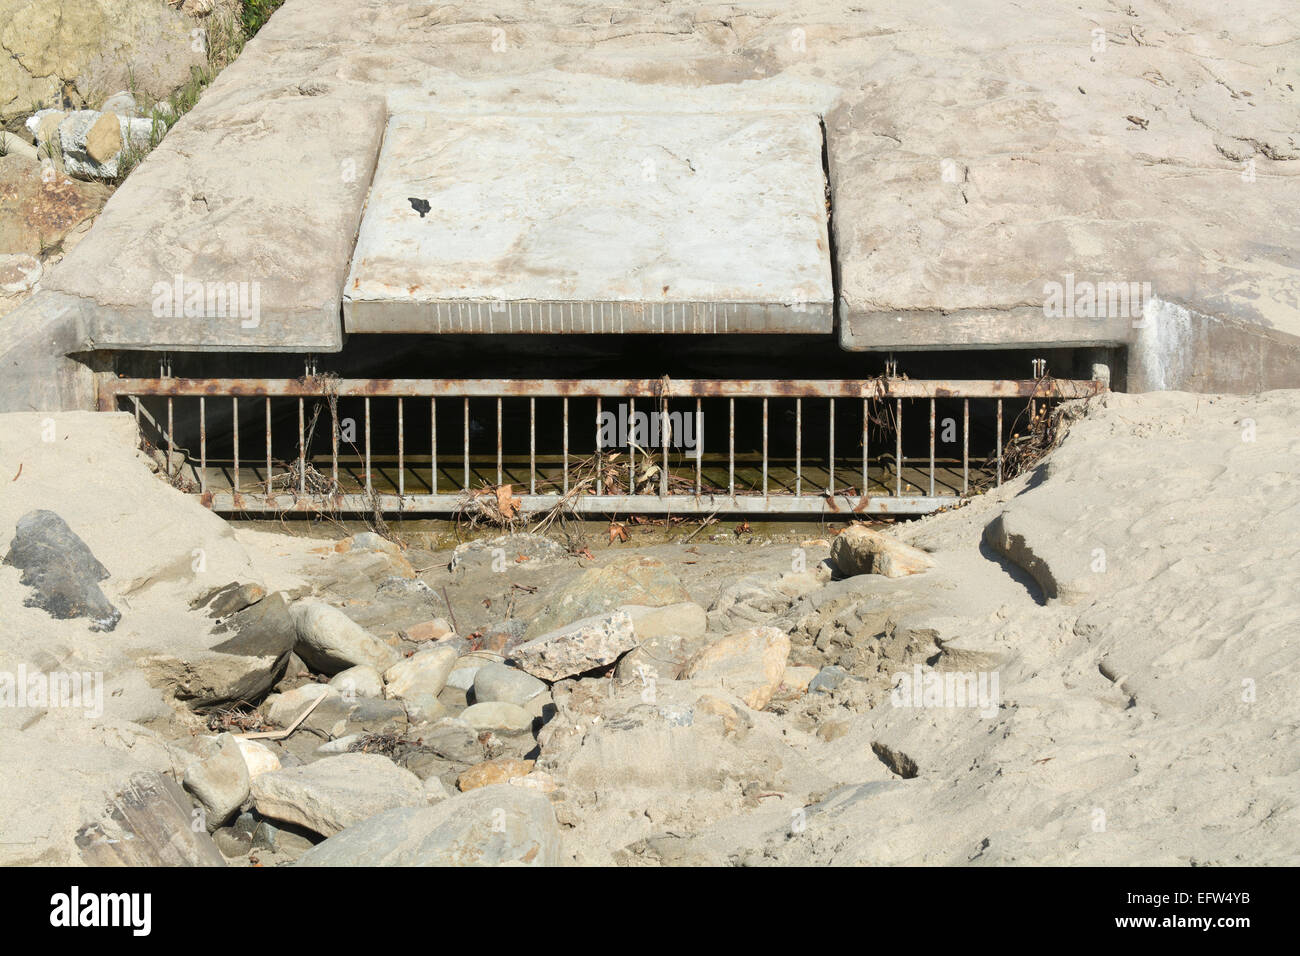 A beach sewer used to drain water runoff from the cliff side during heavy rains to control flooding Stock Photo